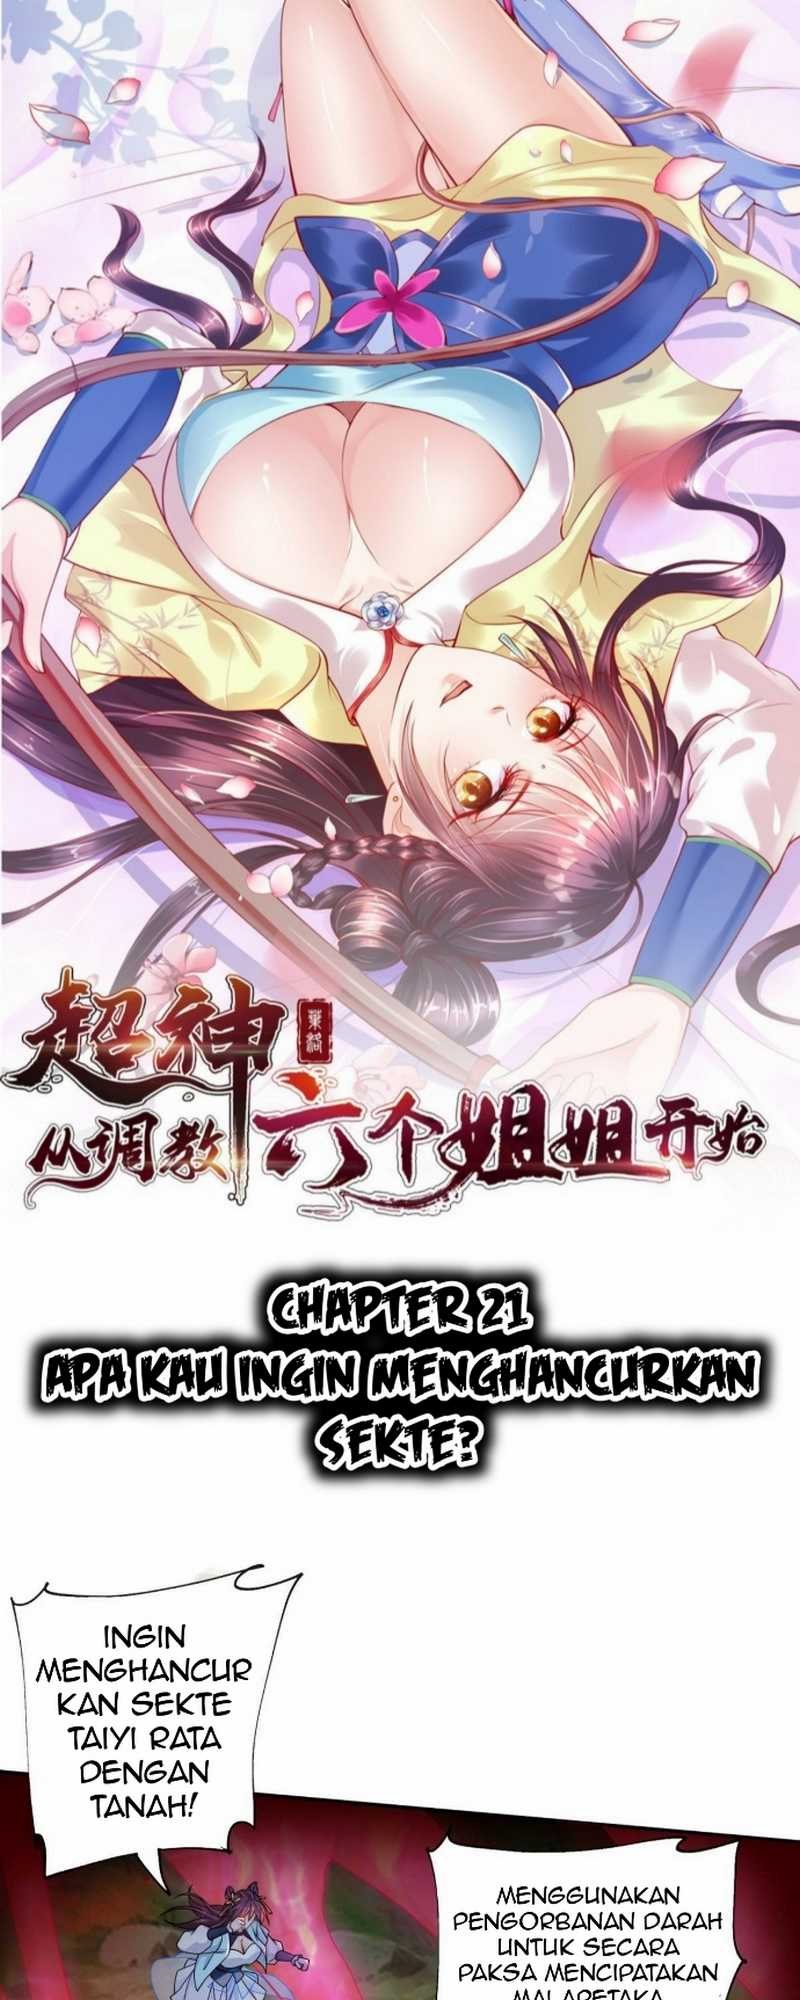 Becoming A God By Teaching Six Sisters Chapter 21